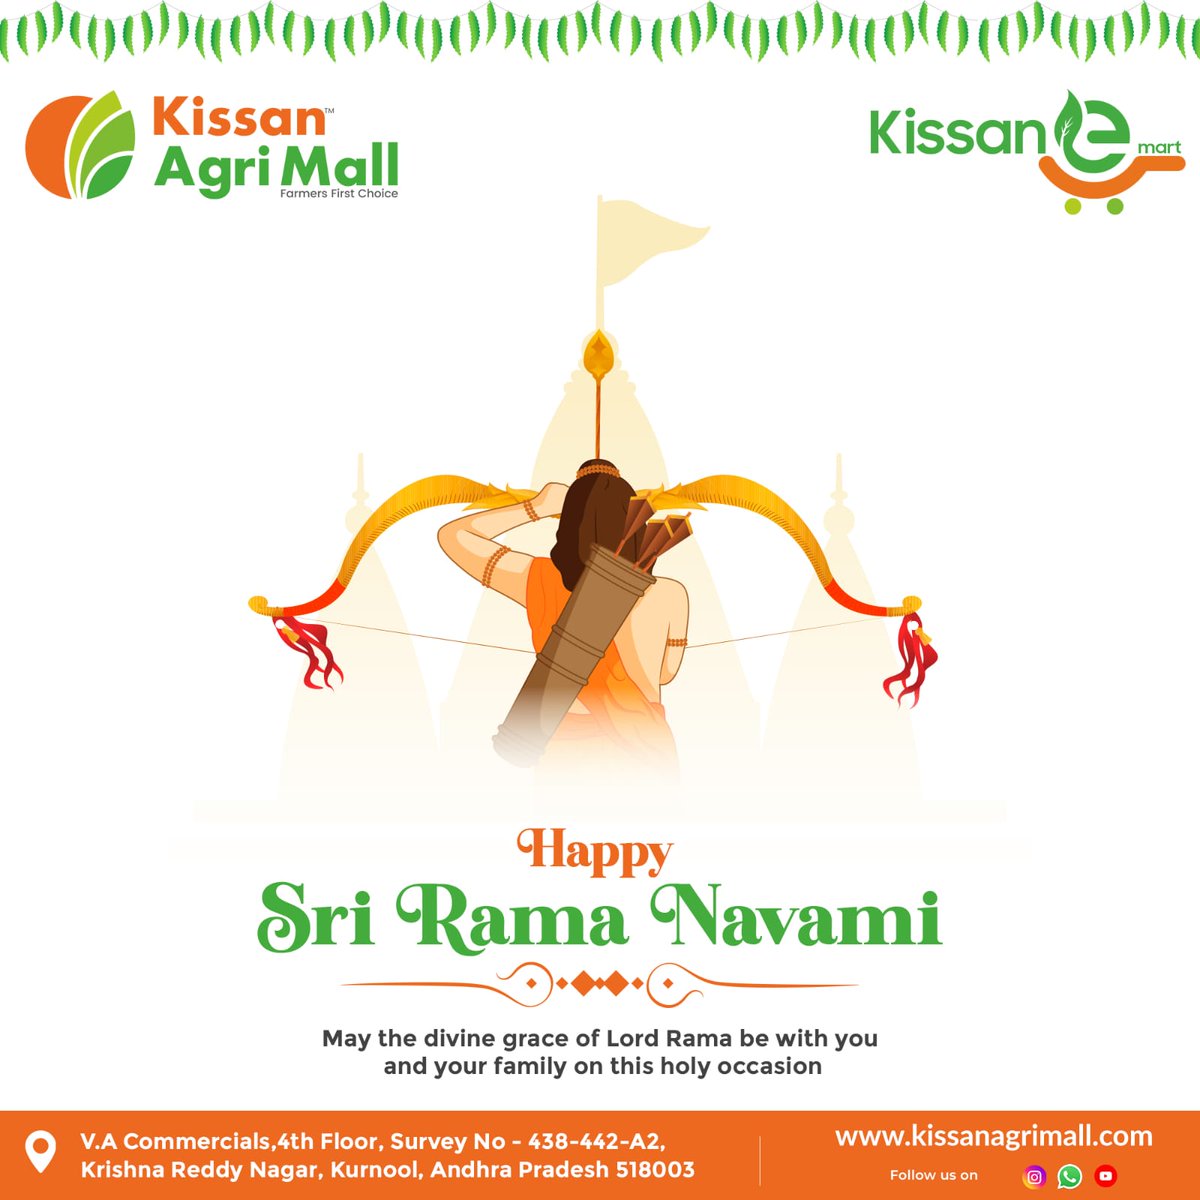 🌾✨ Wishing You a Blessed Sri Rama Navami! ✨🌾

From the entire family of Kissan Agri Mall, we extend our warmest wishes on the auspicious occasion of Sri Rama Navami.  

#SriRamaNavami #KissanAgriMall #BlessingsOfRama #HarvestHappiness #AgricultureProsperity #FarmingJoy